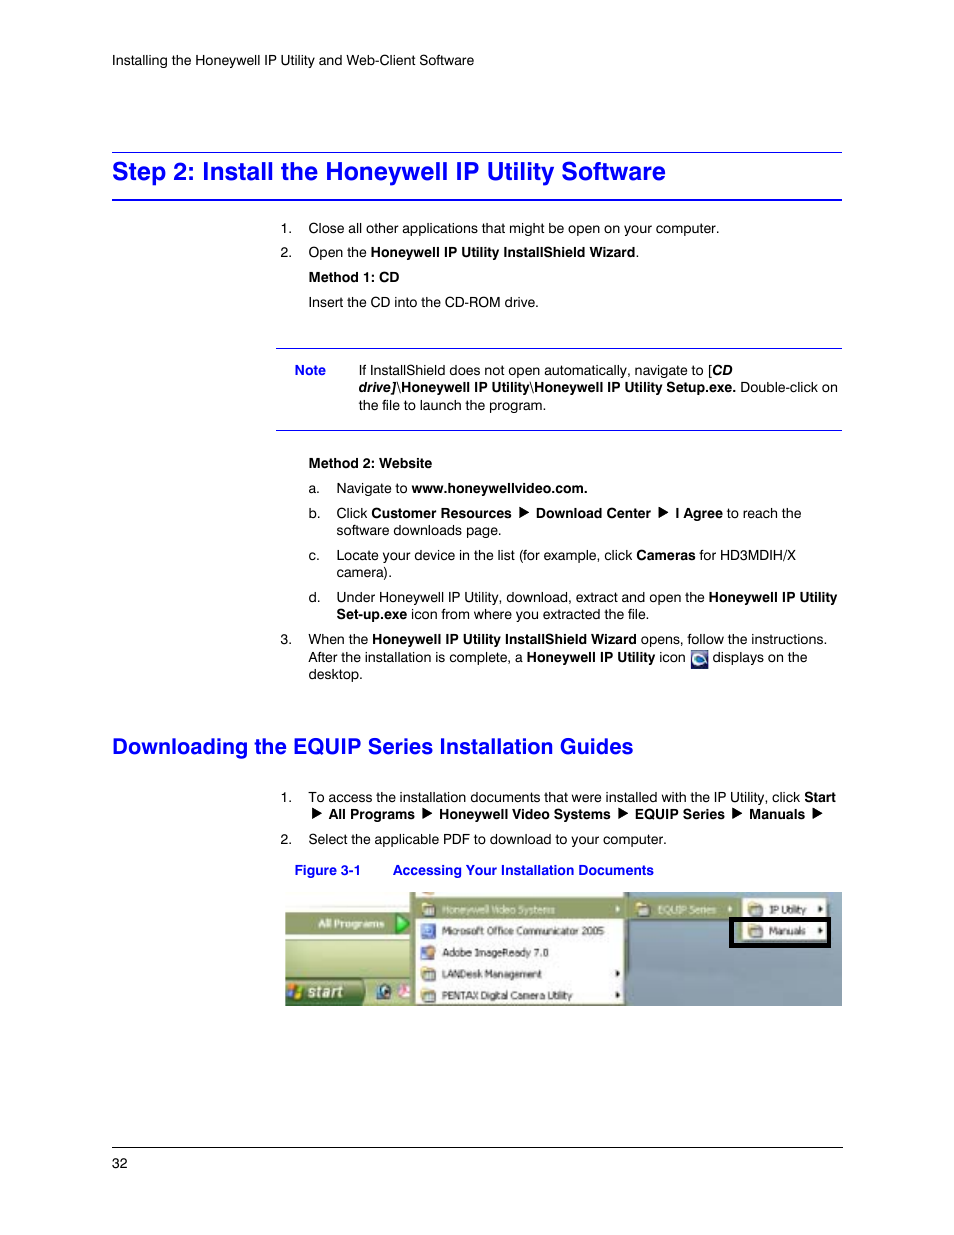 Step 2 Install The Honeywell Ip Utility Software Downloading The Equip Series Installation Guides Figure 3 1 Honeywell Equip Hd3mdihx User Manual Page 32 80